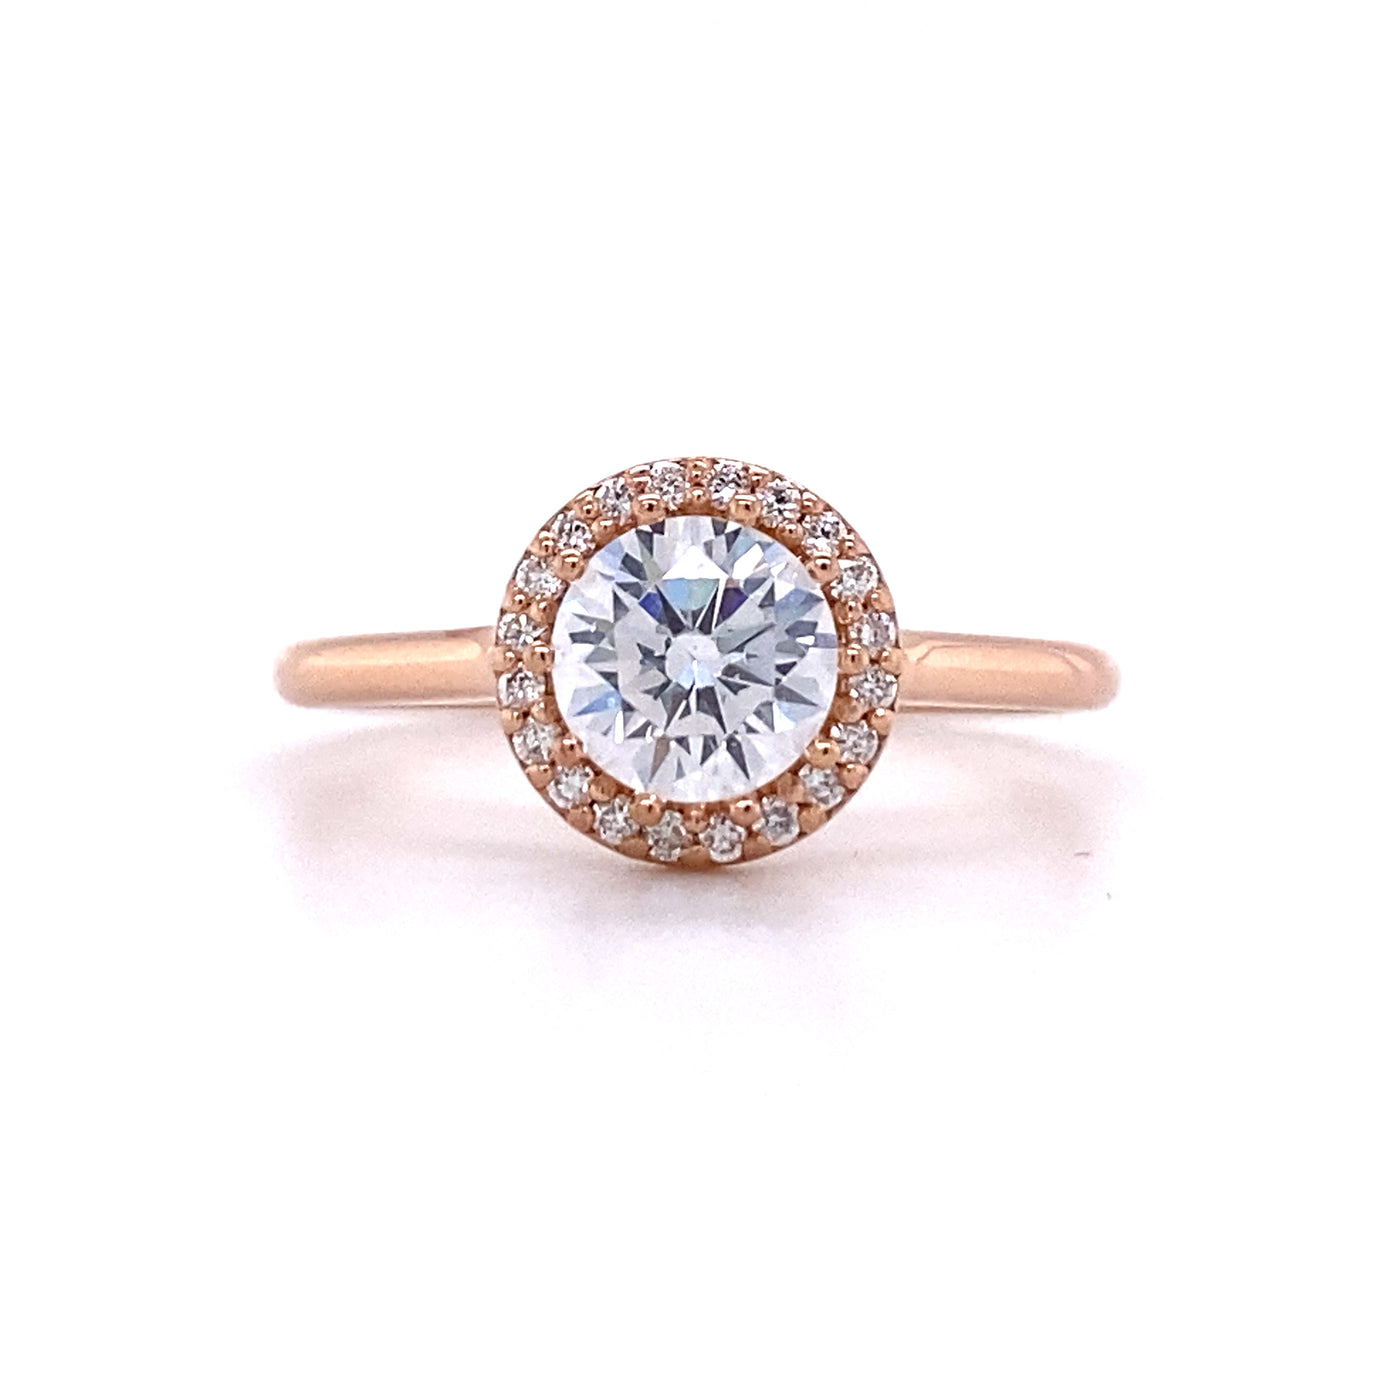 Beeghly & Co. 14 Karat Rose Gold Halo Round Shape Engagement Ring BCR-86